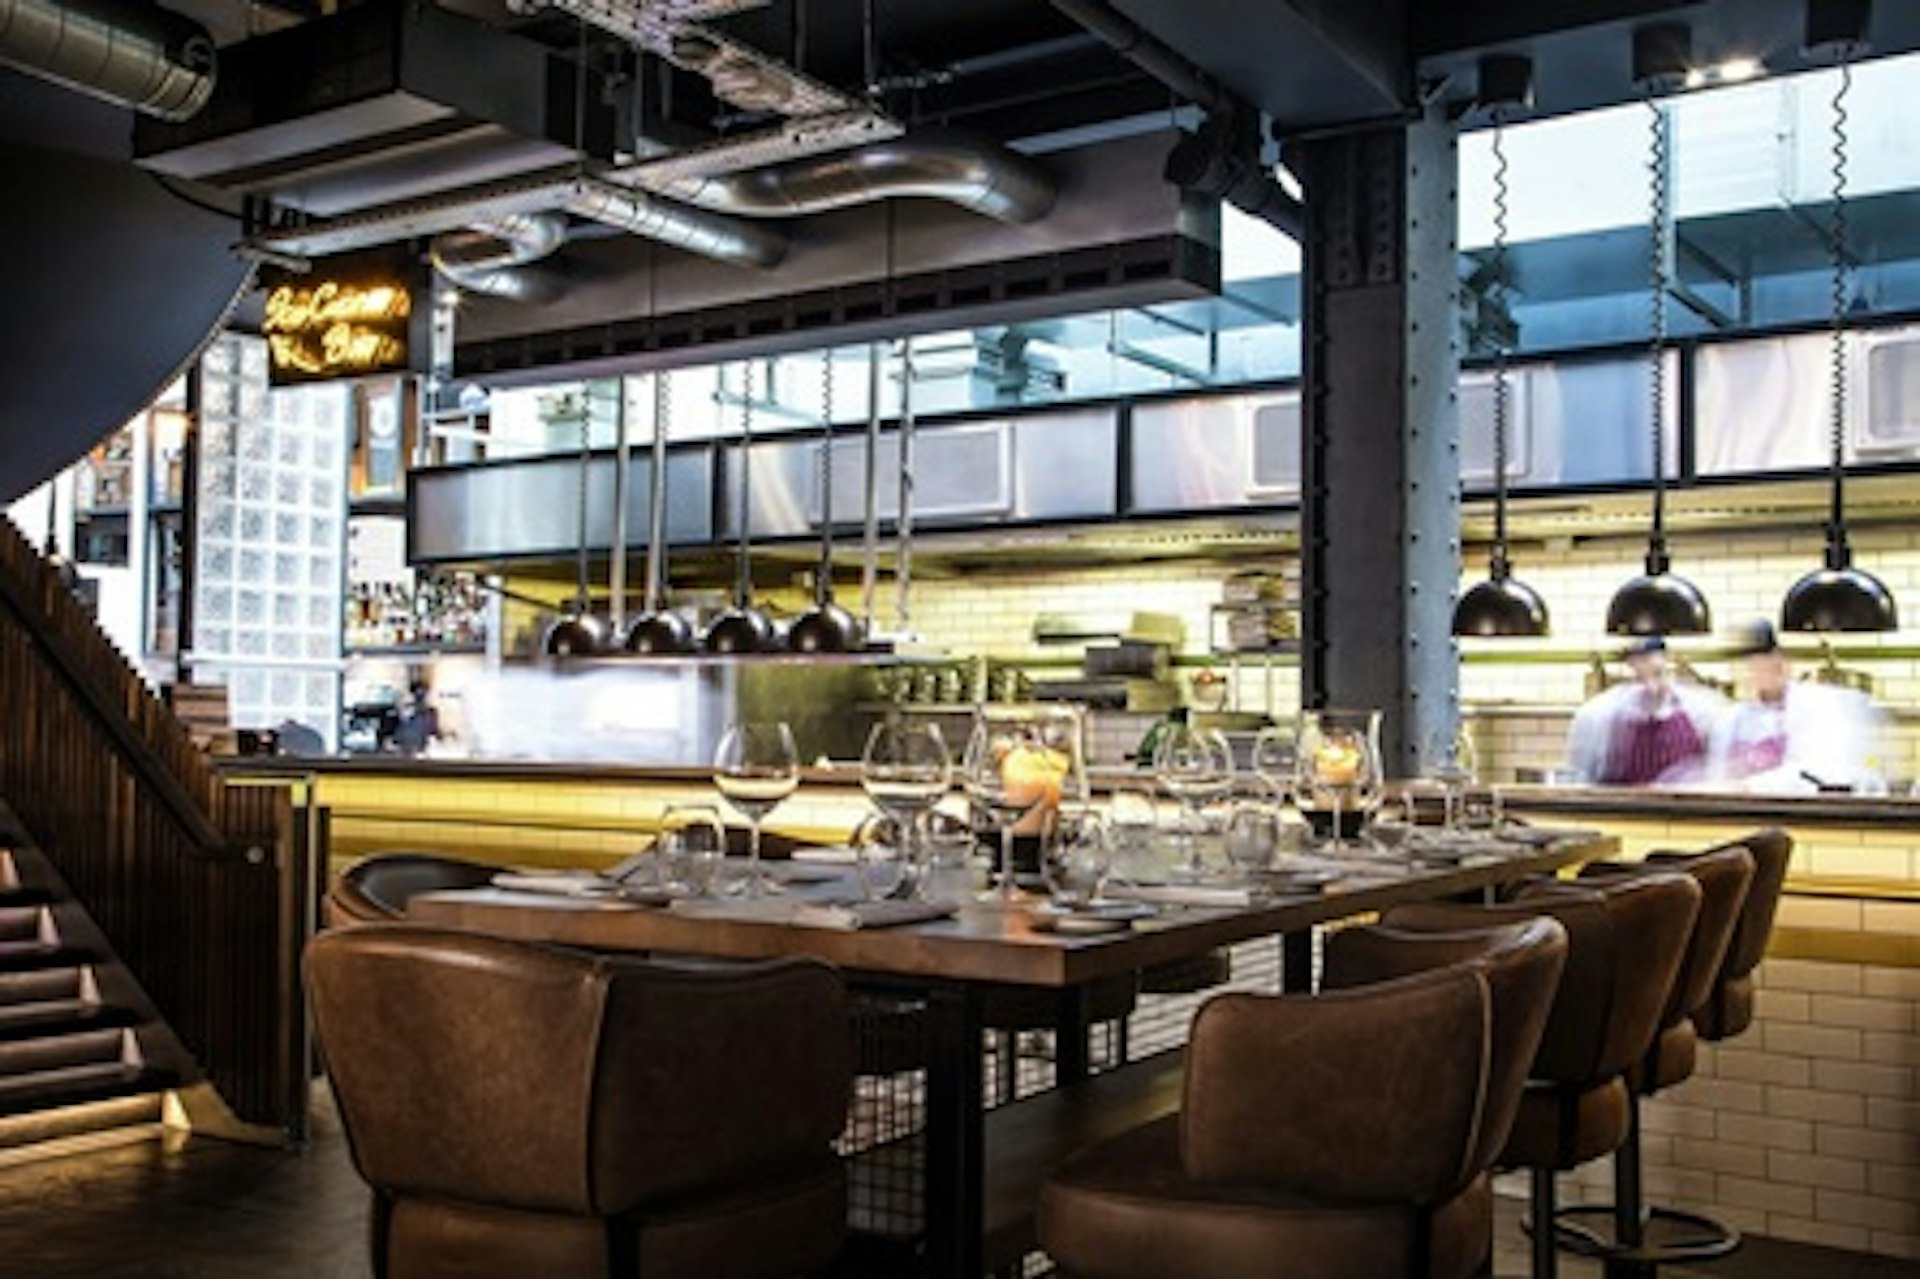 Kitchen Table Experience with Five Course Meal for Four at Gordon Ramsay's Heddon Street Kitchen 2